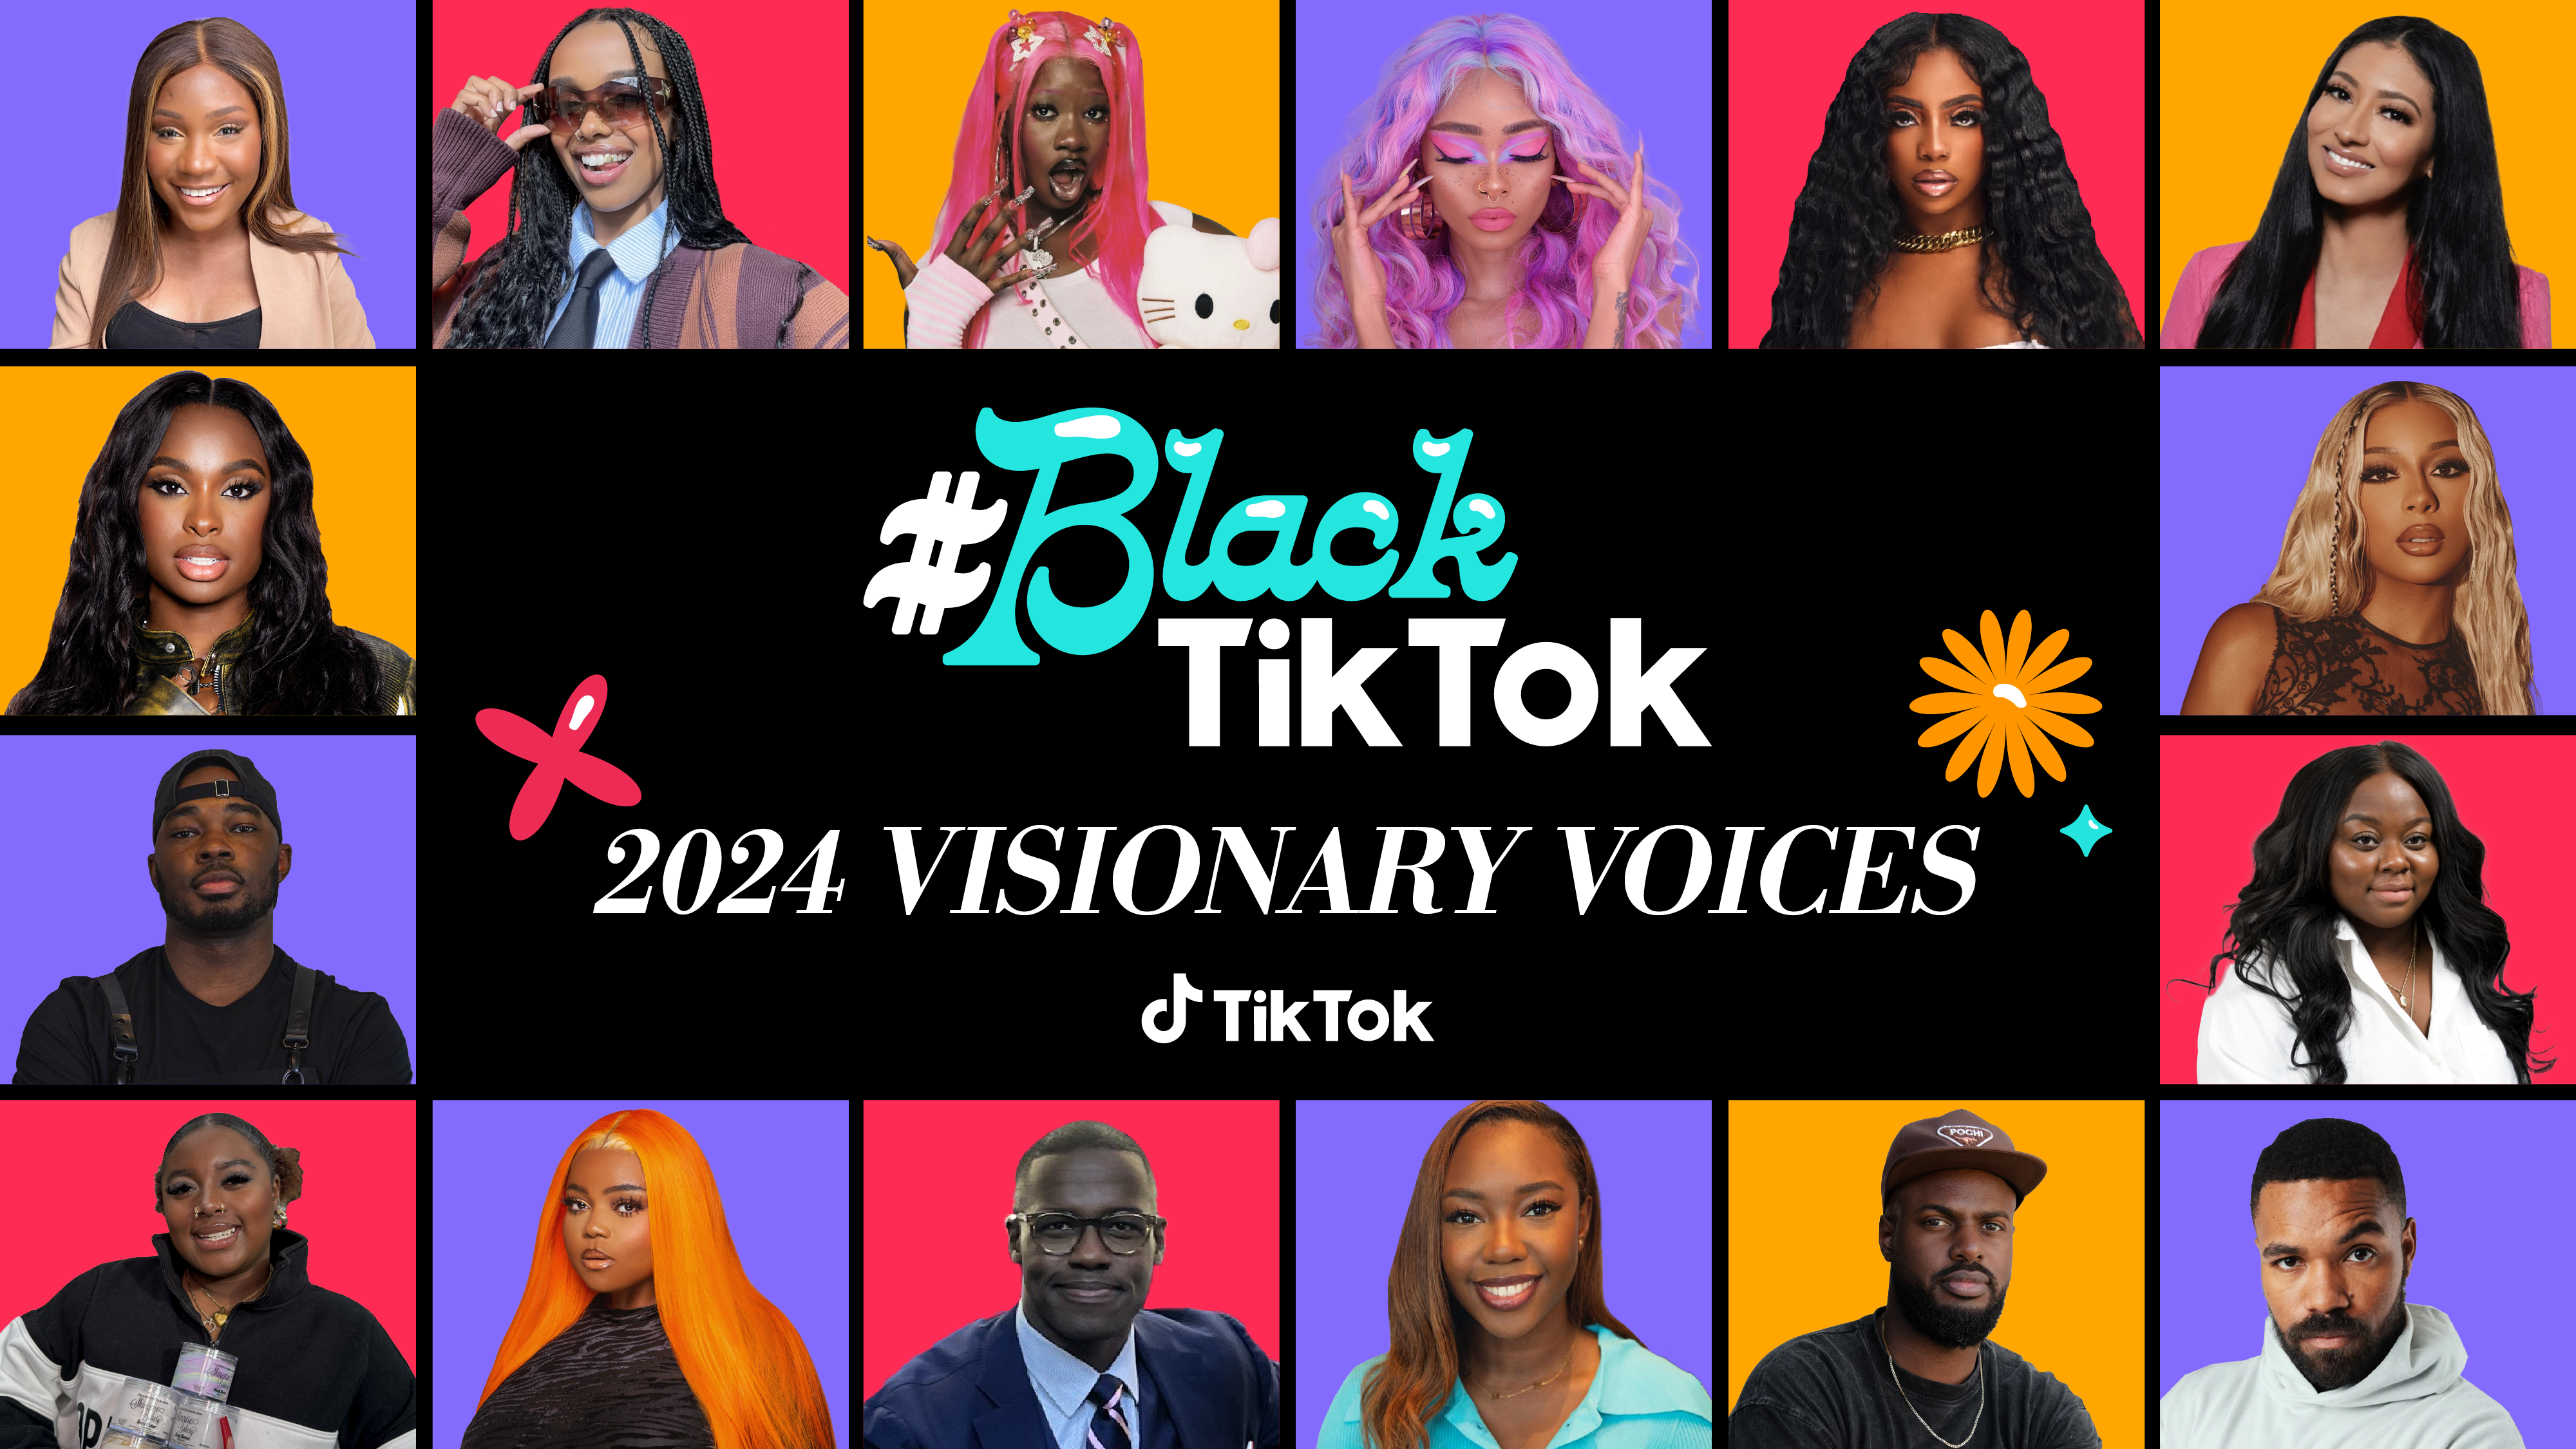 TikTok's #BlackTikTok Visionary Voices List For 2024 Includes Aliyah's Interlude, Jordan Howlett, Olamide Olowe's Topicals And More